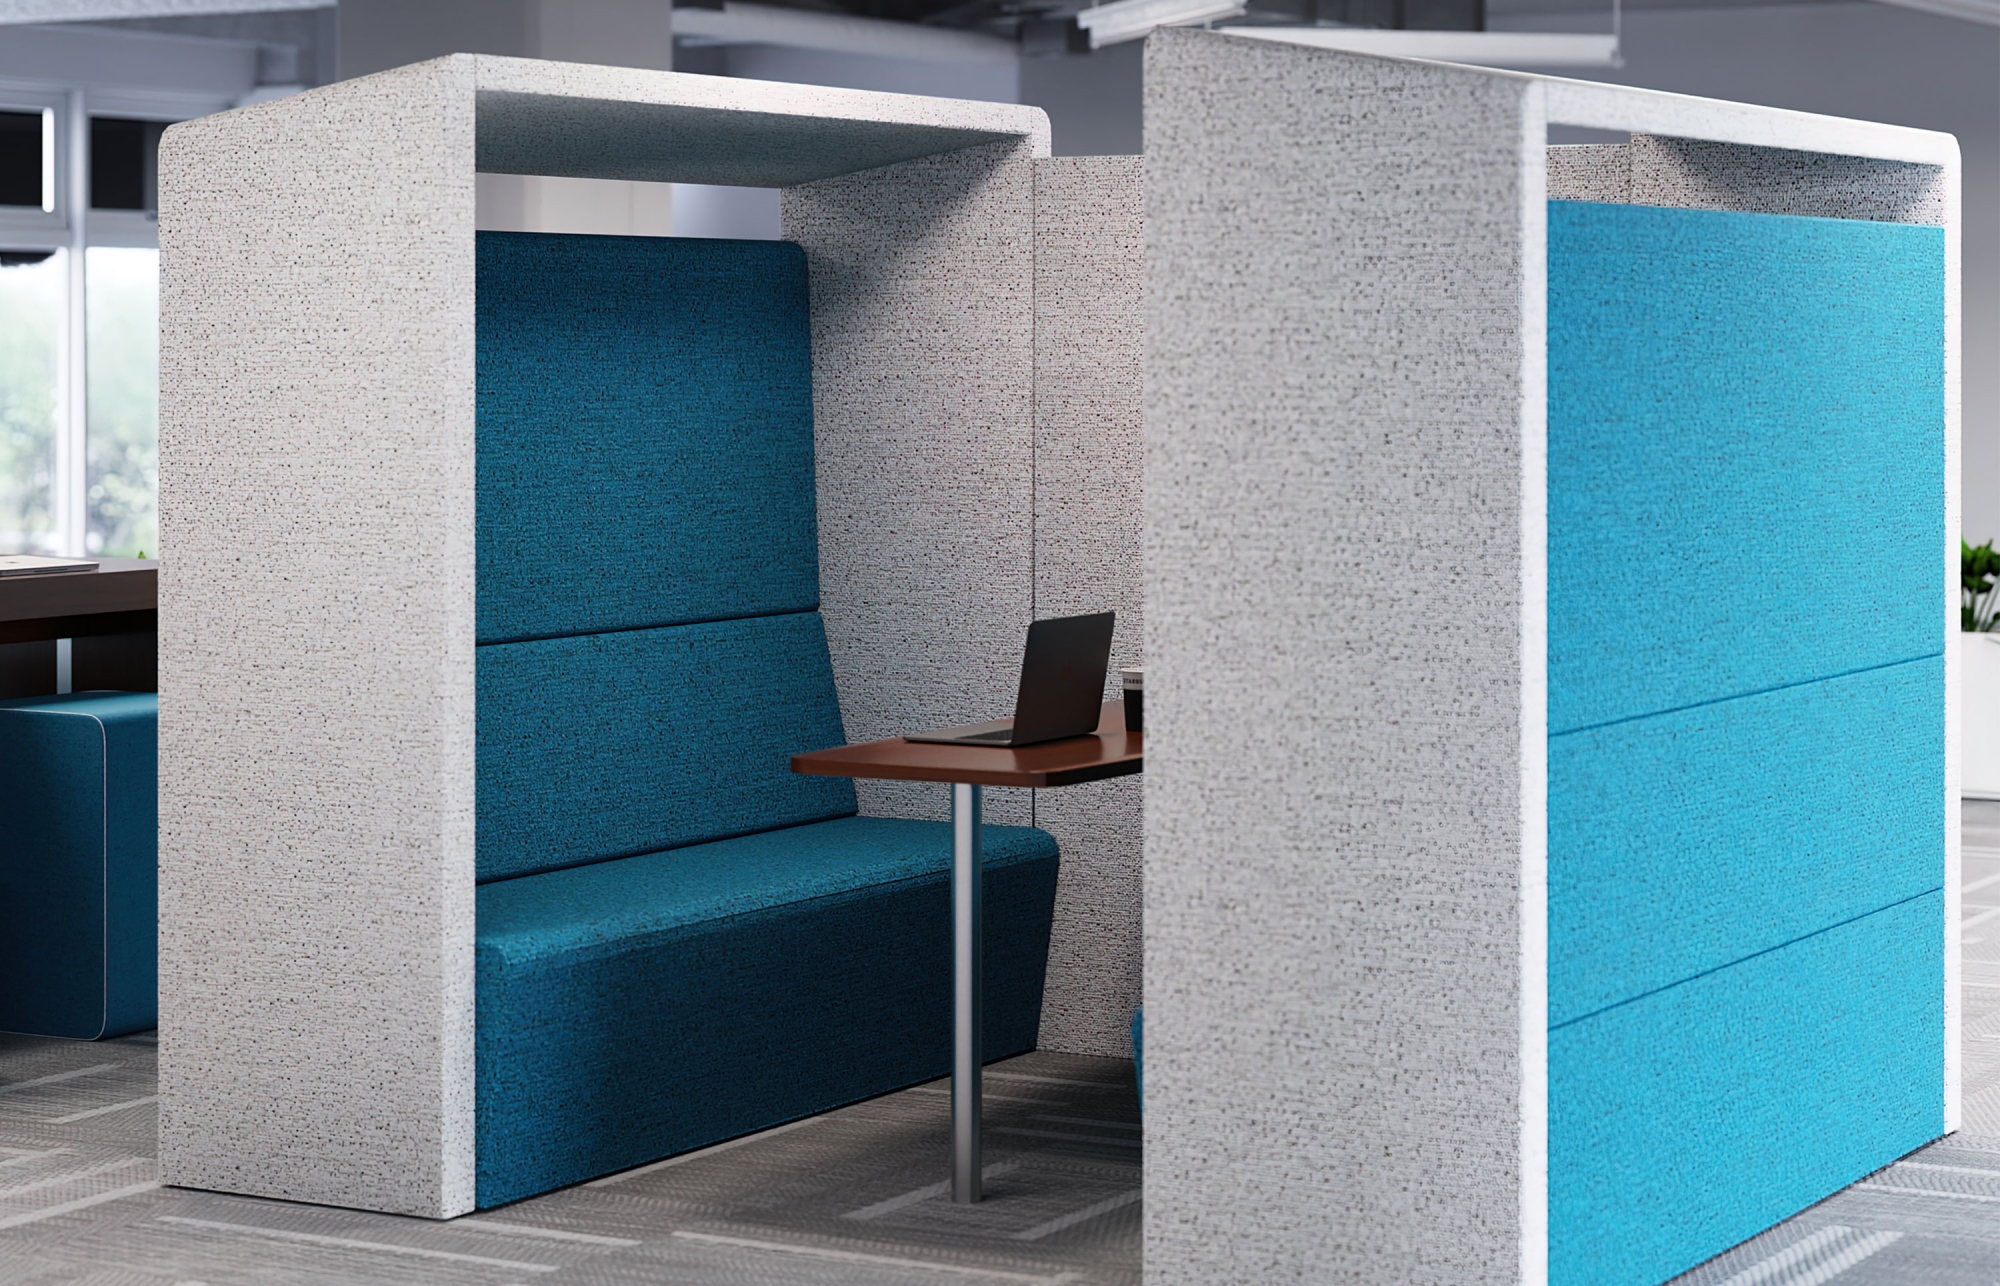 sound blocking office pod in gray and blue